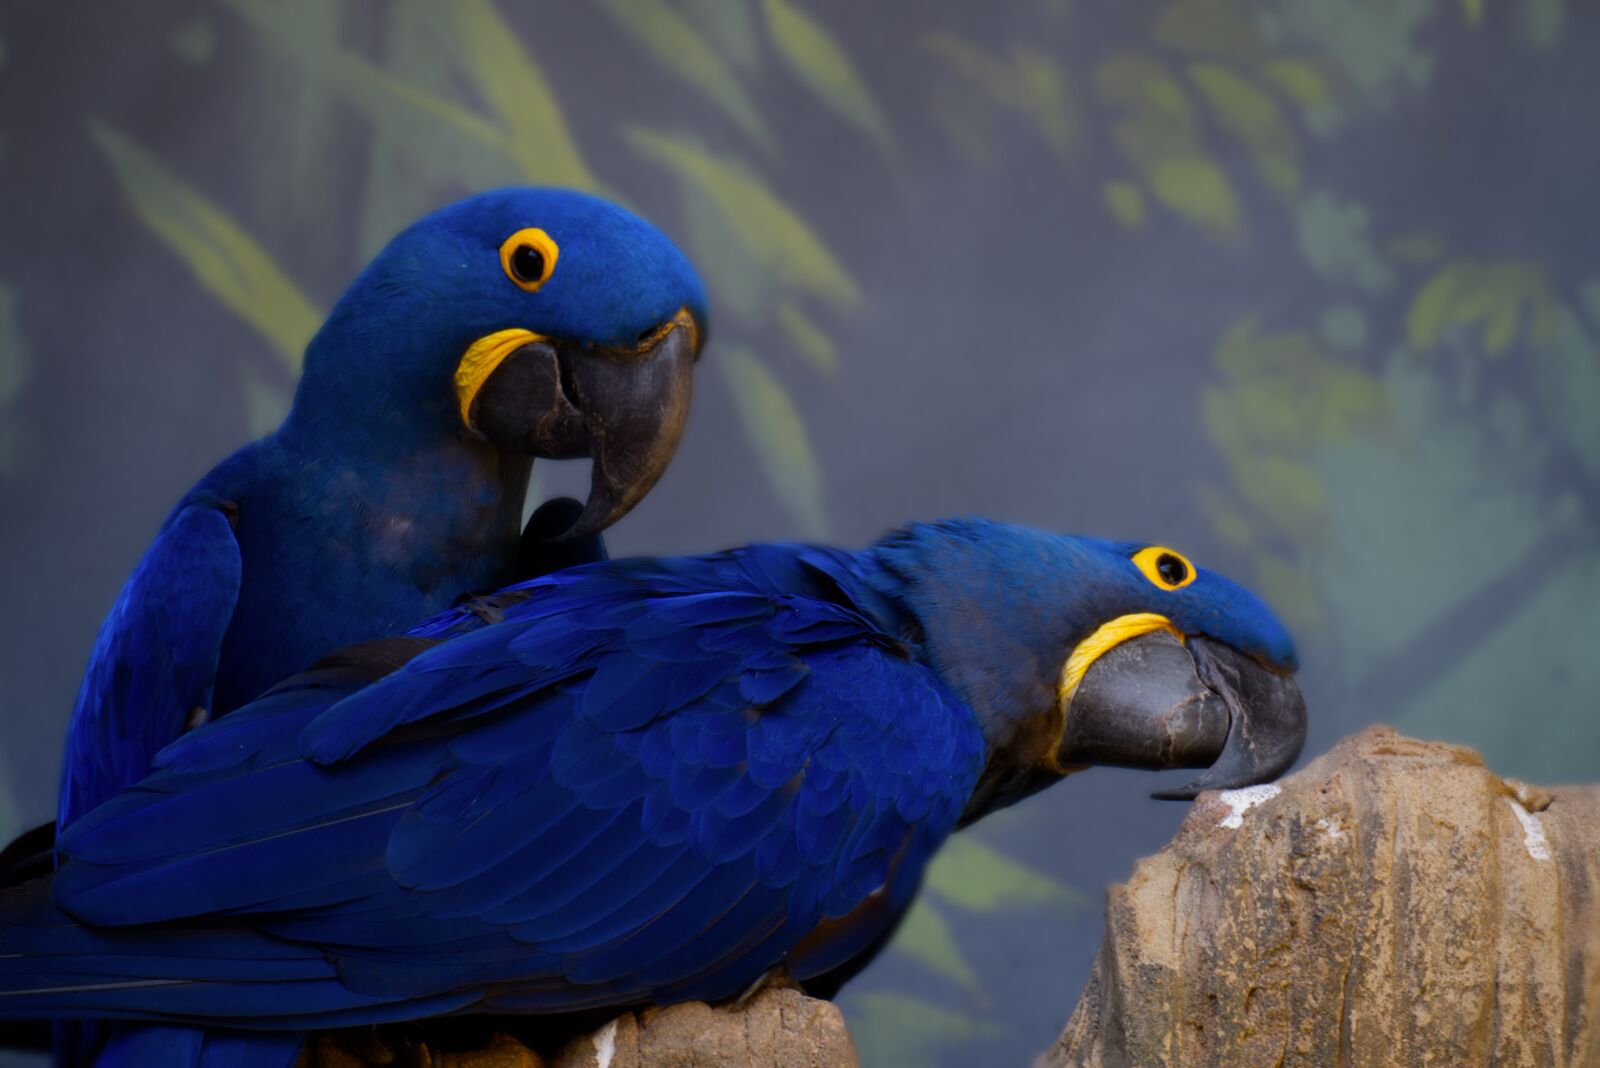 Fujifilm X-A10 sample photo. Hyacinth macaw, blue parrot photography